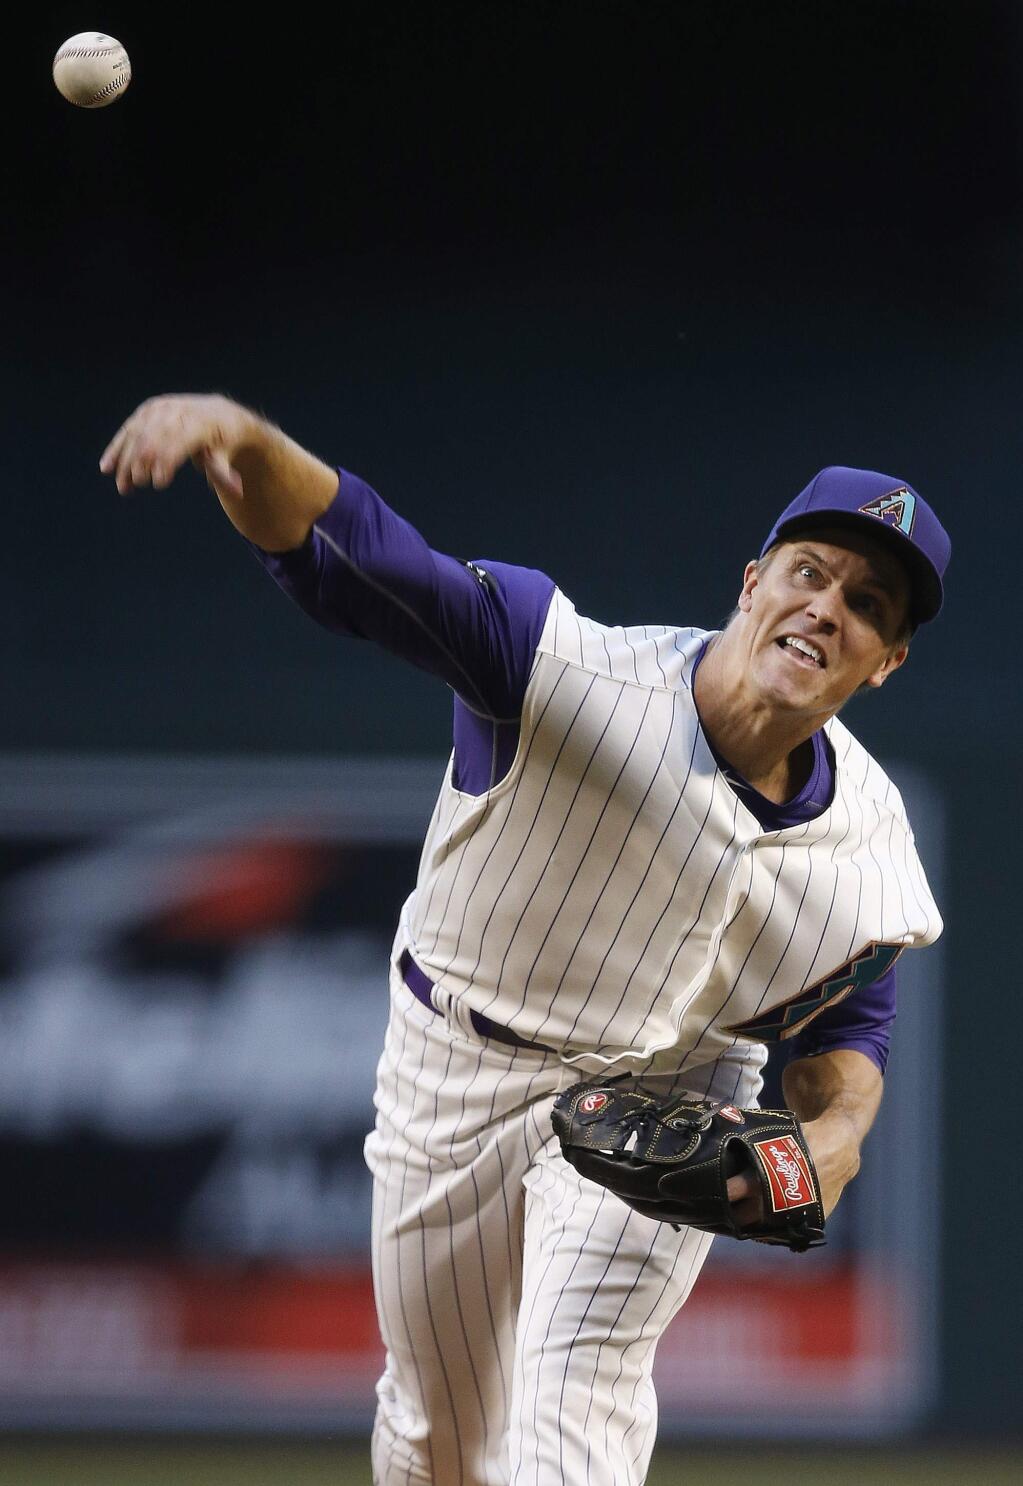 Arizona Diamondbacks' Zack Greinke throws a pitch against the San Francisco Giants during the first inning of a baseball game Thursday, May 12, 2016, in Phoenix. (AP Photo/Ross D. Franklin)